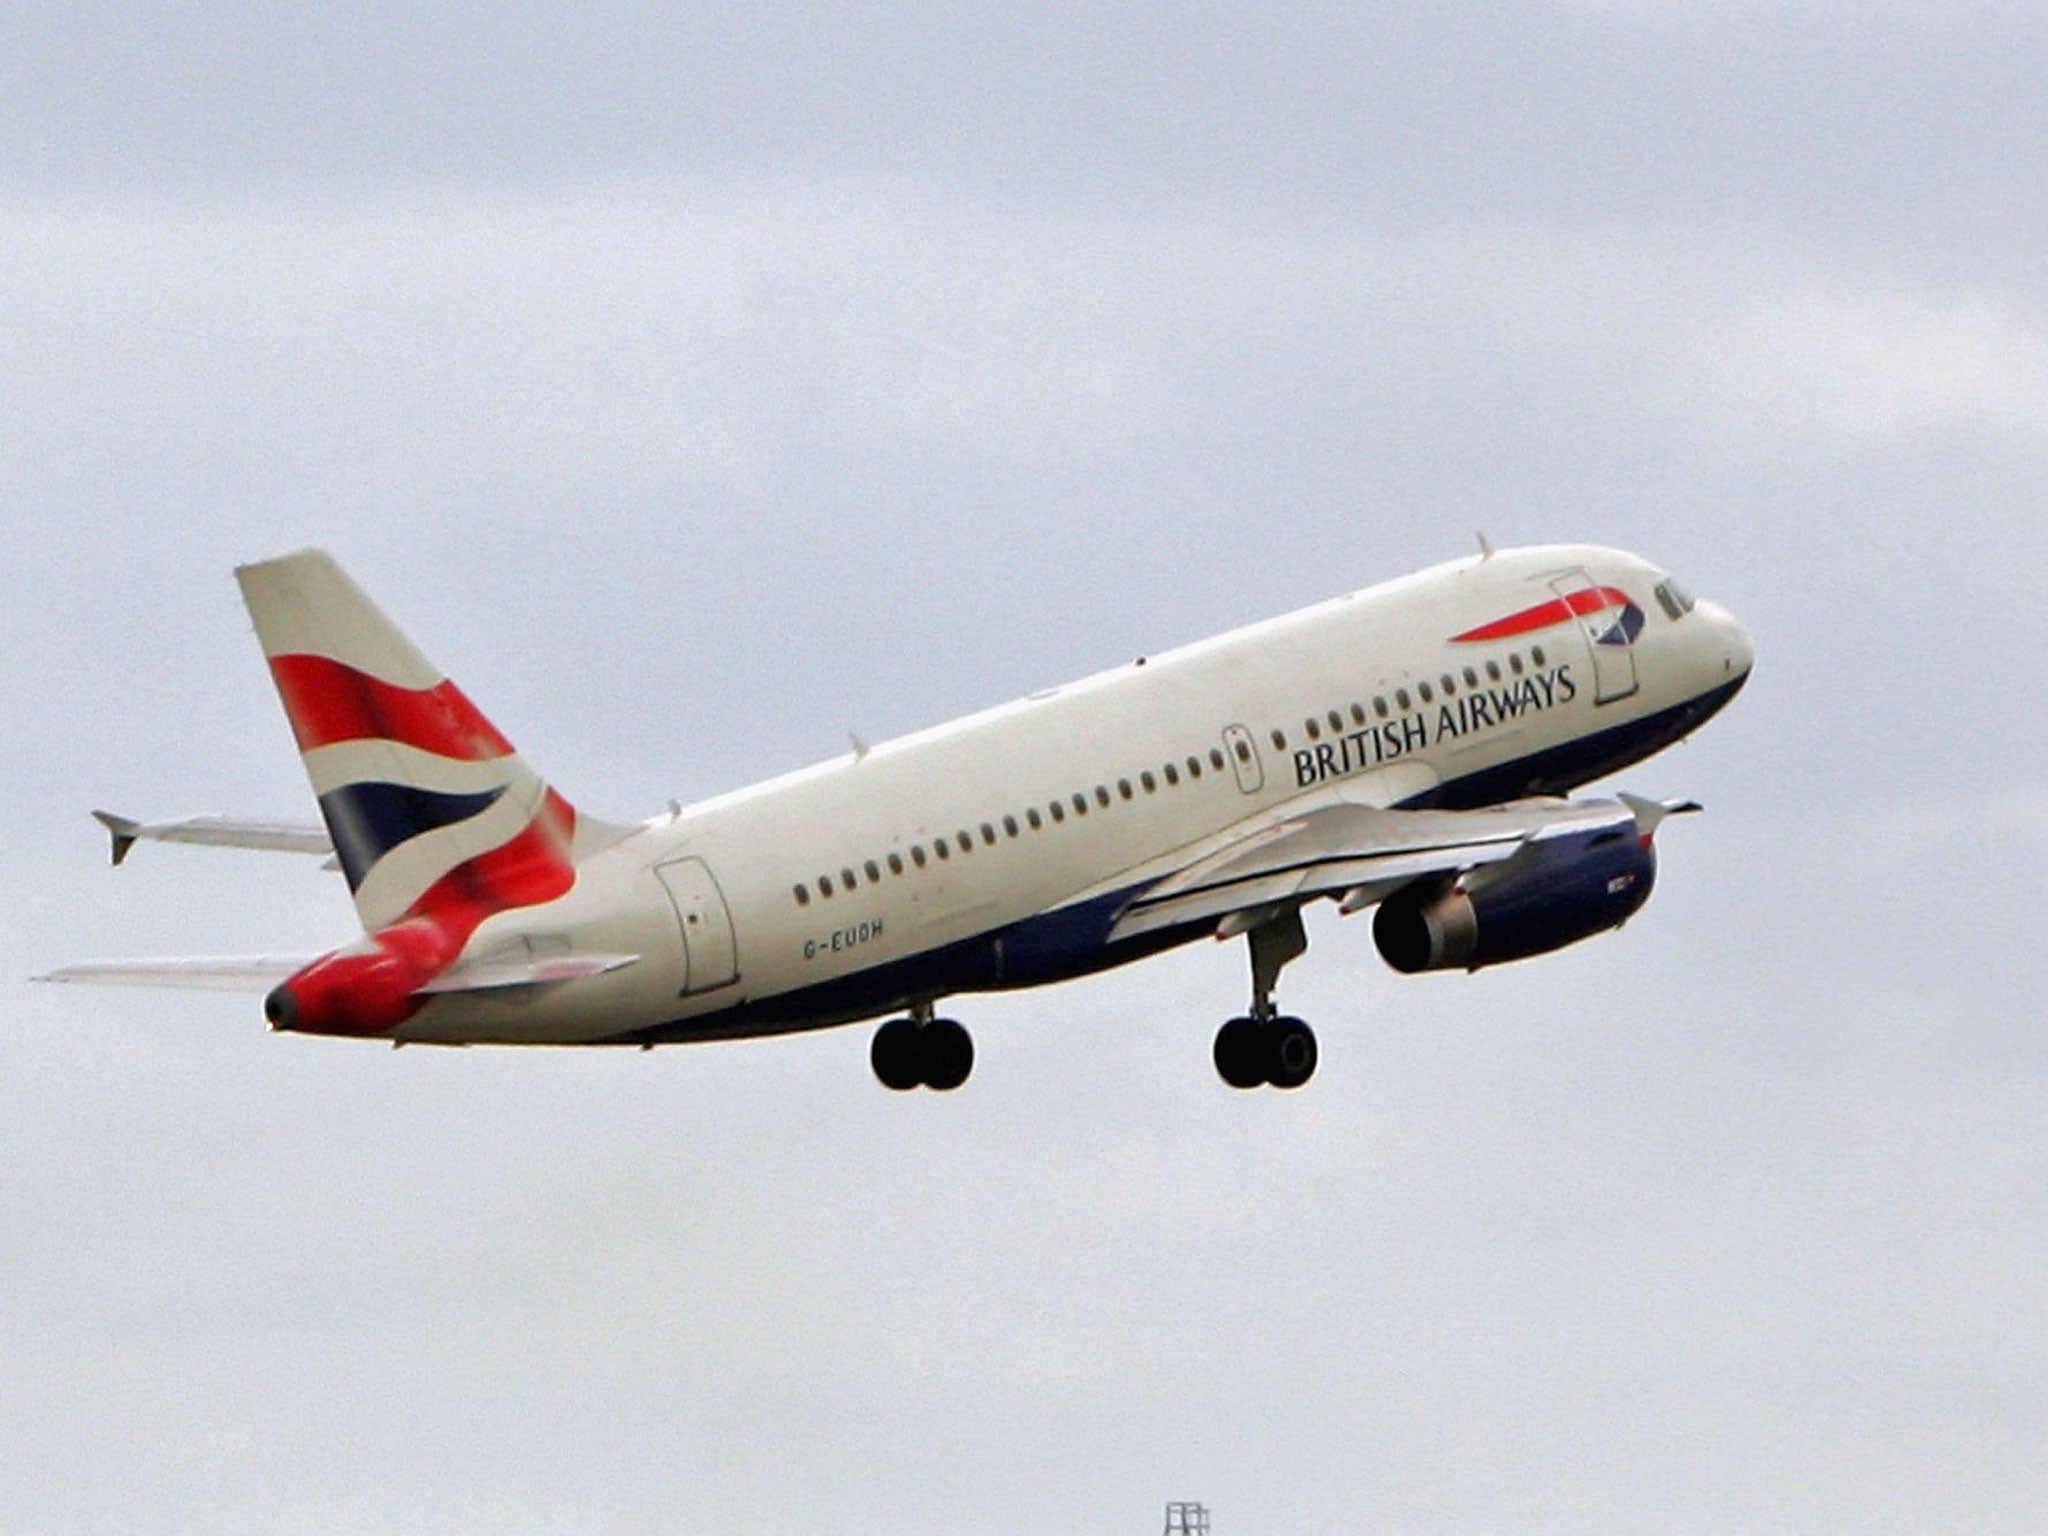 The plane was travelling from London to Los Angeles